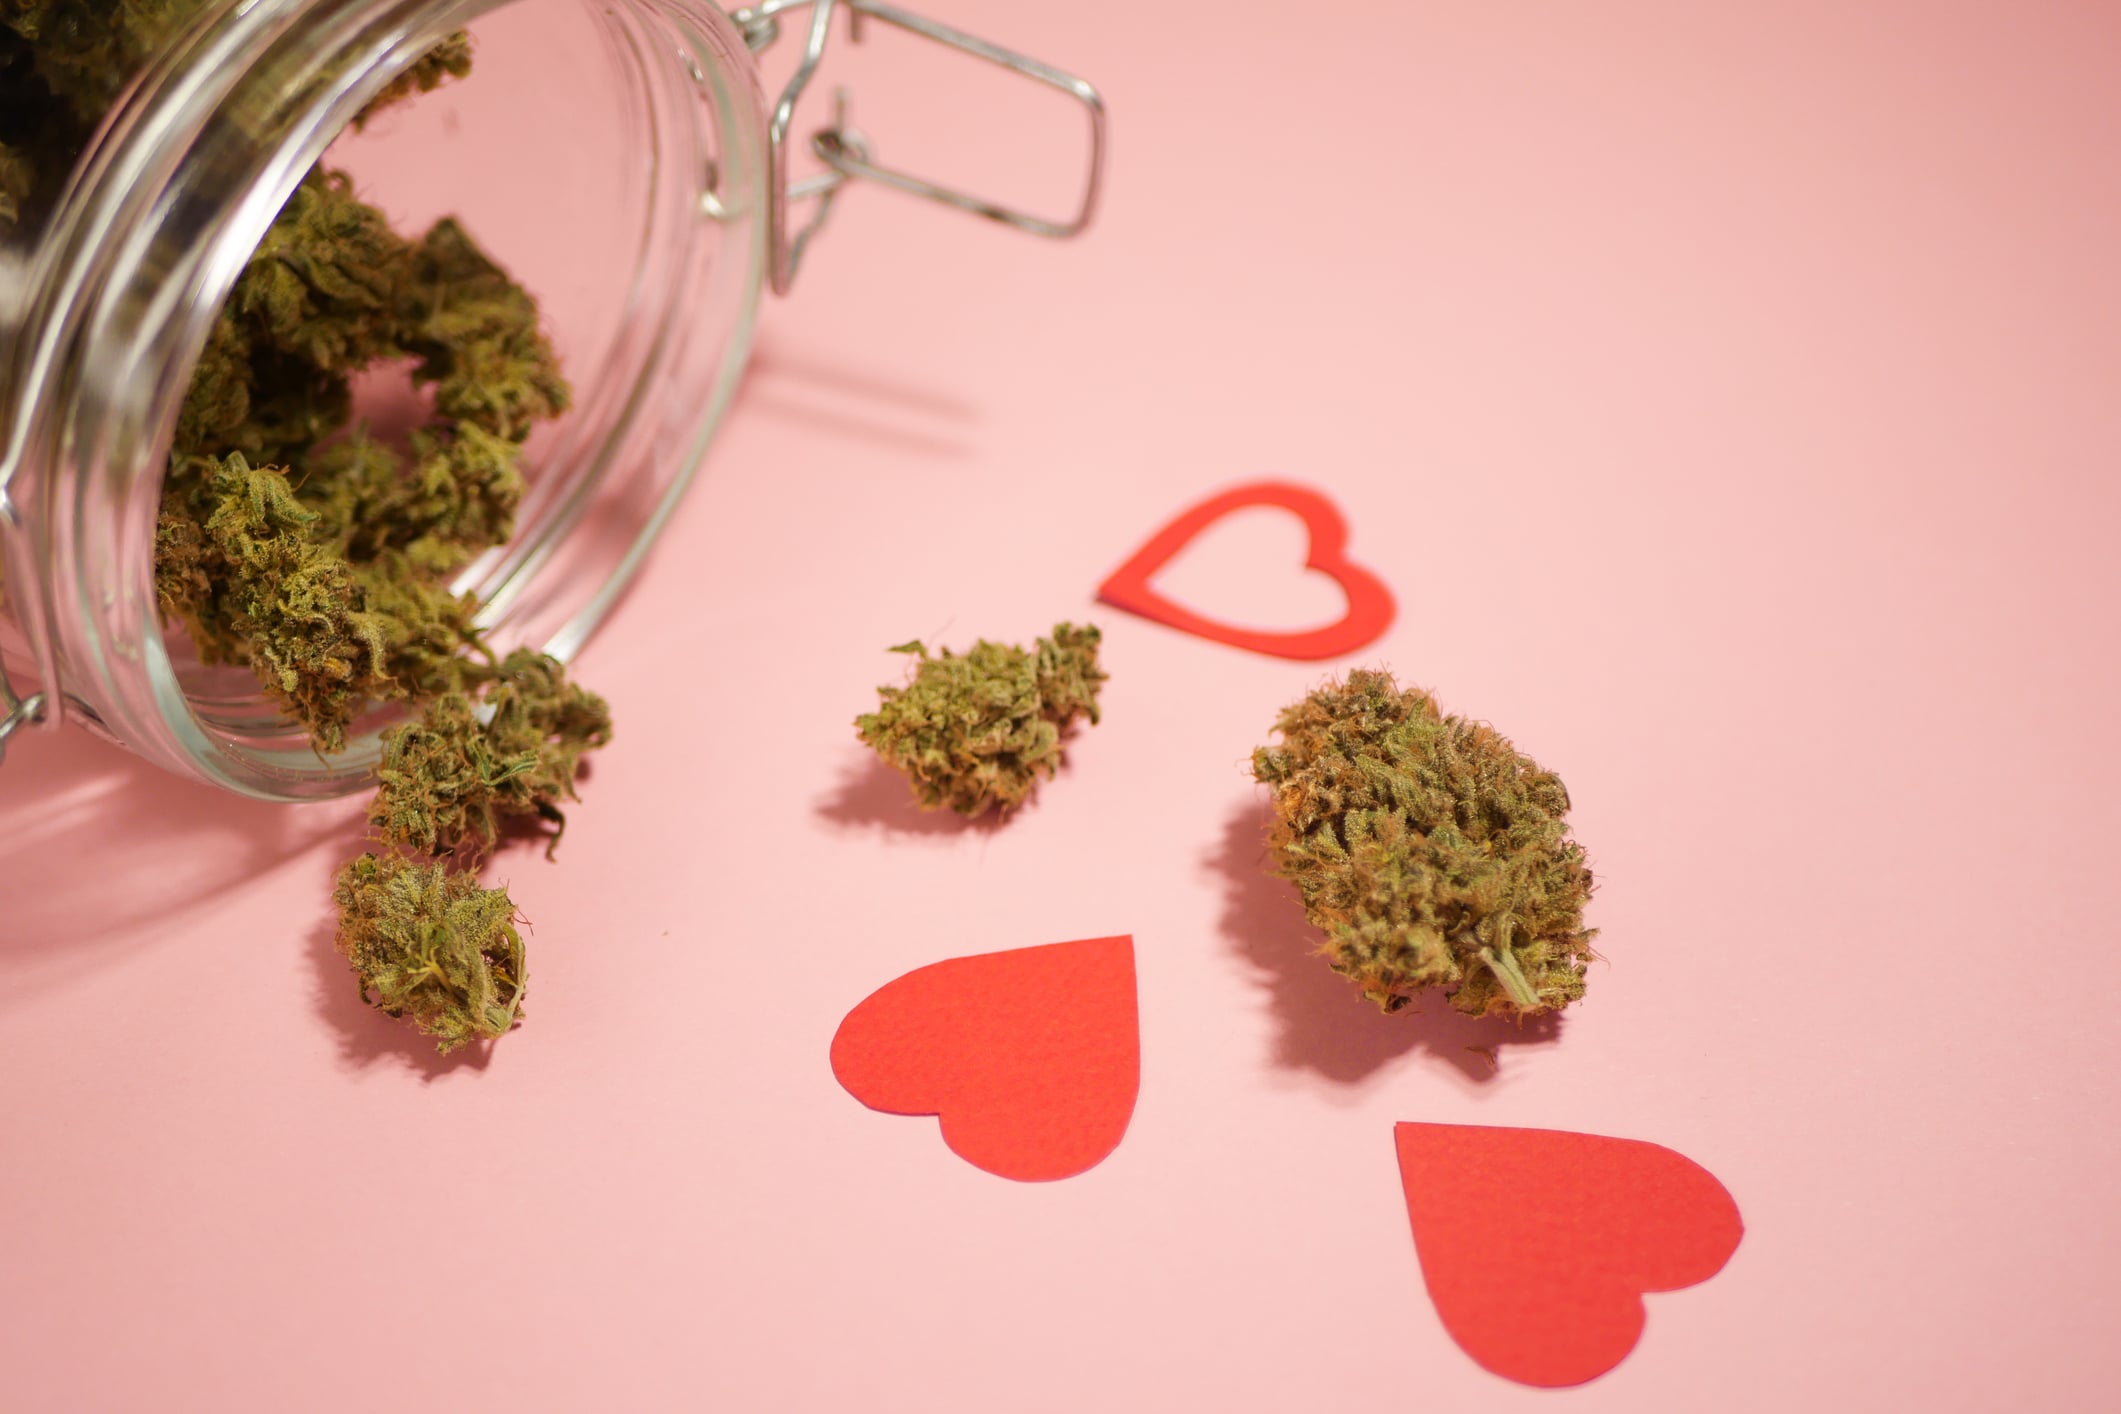 The Best Cannabis Products for Valentine's Day in Halifax, MA